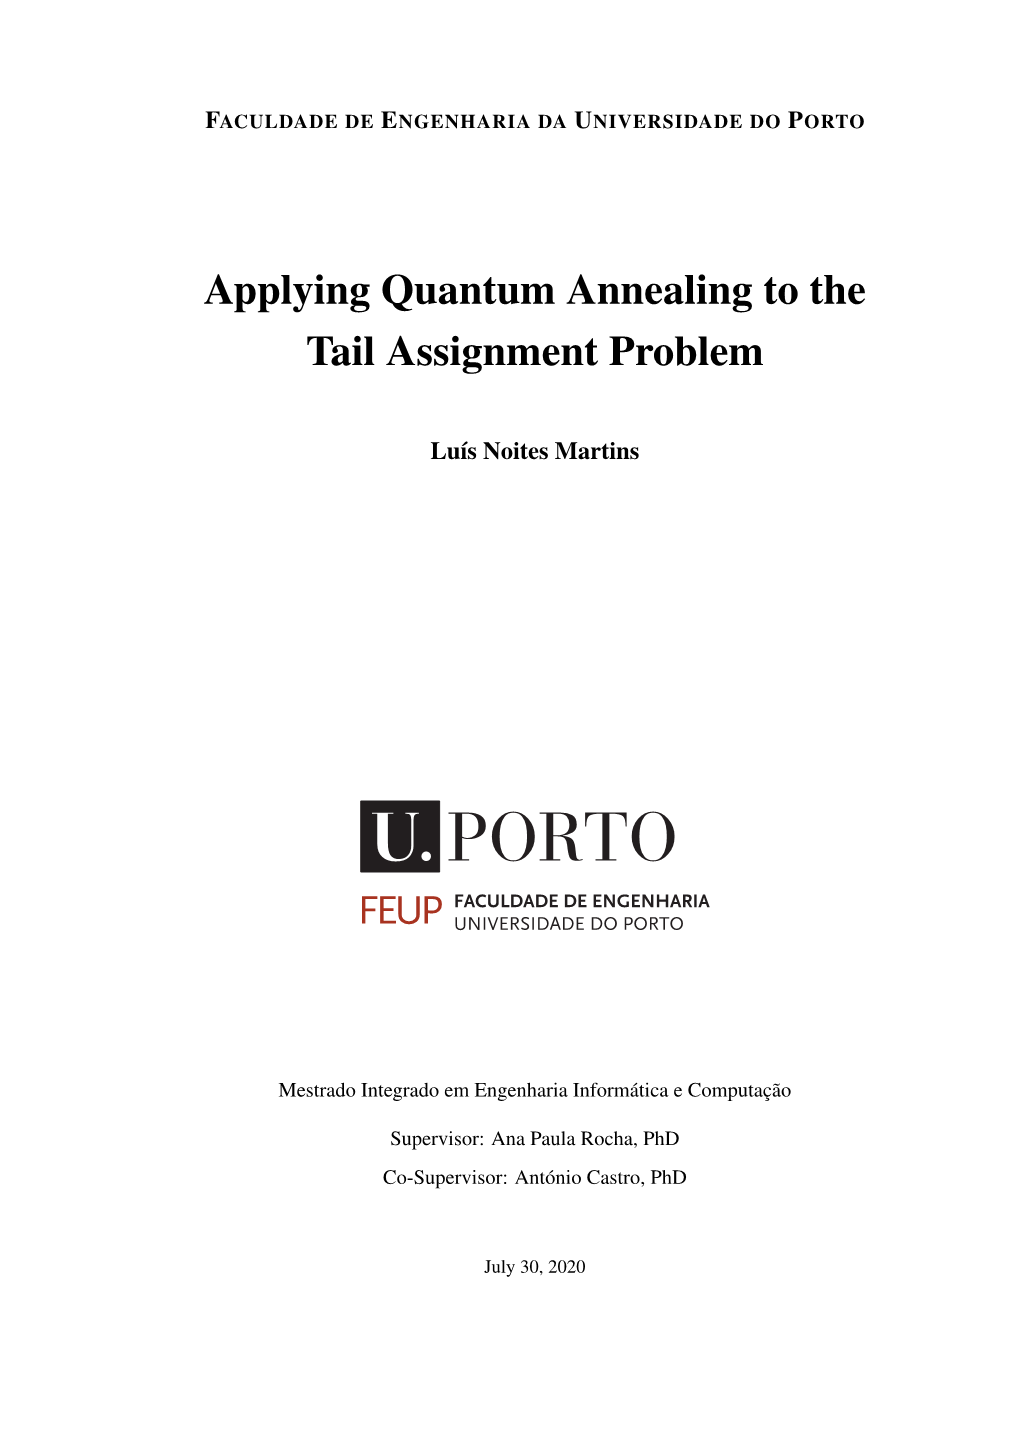 Applying Quantum Annealing to the Tail Assignment Problem